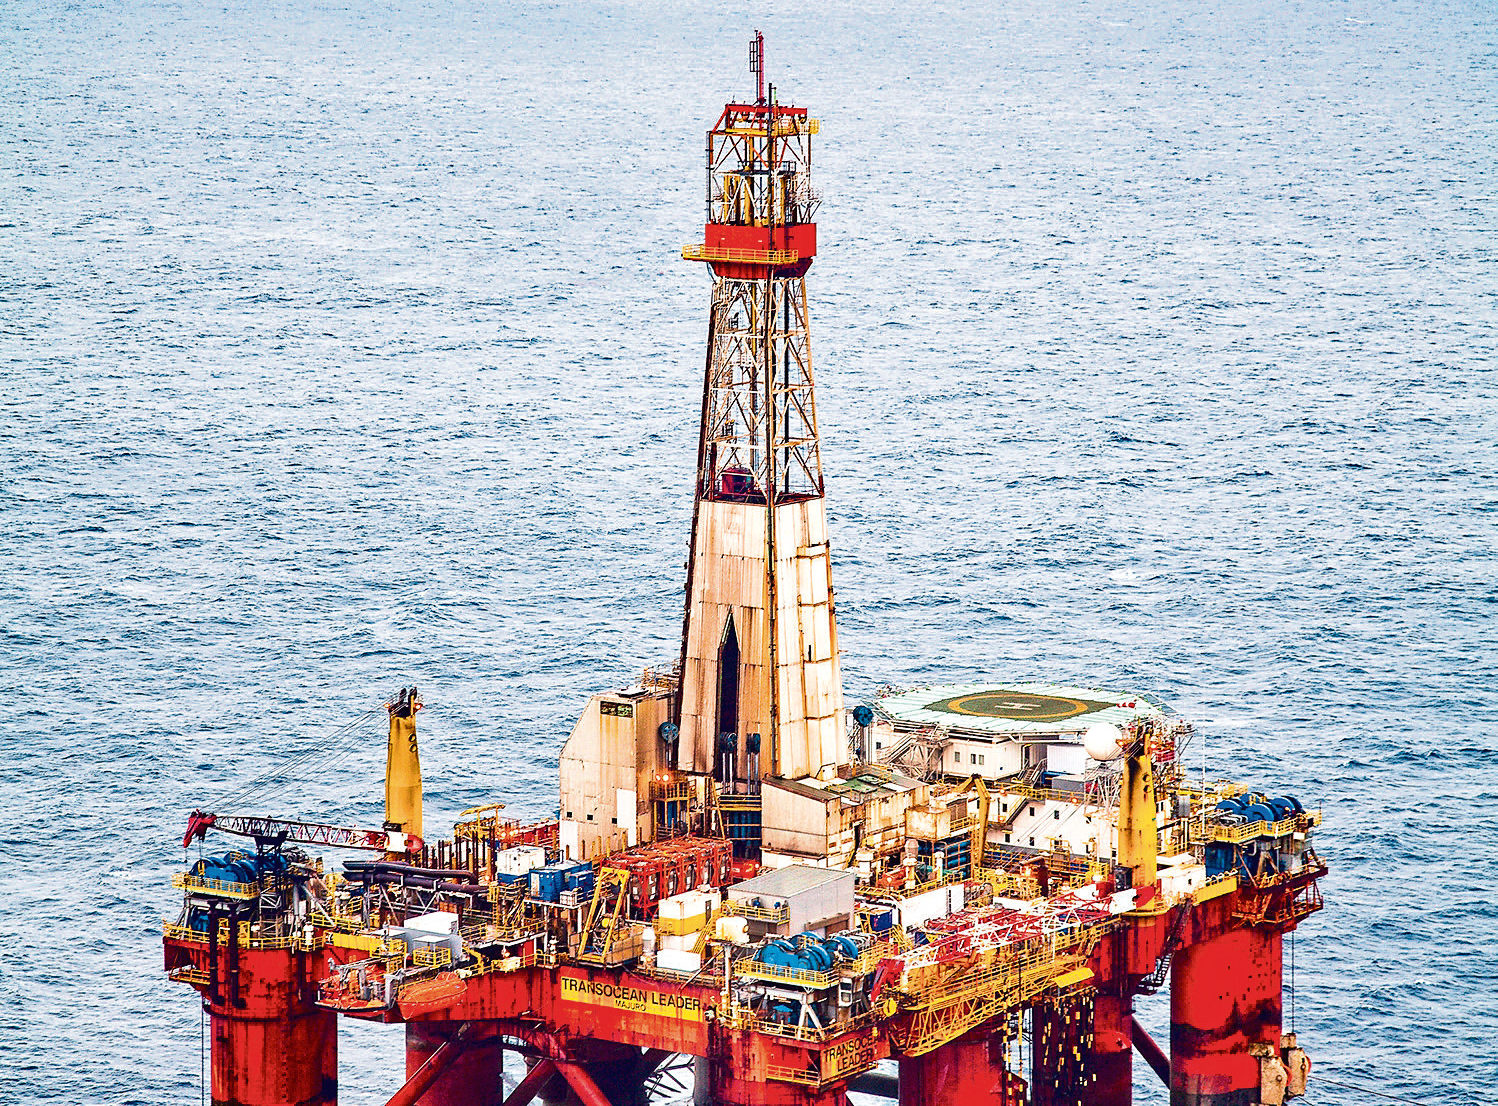 The Transocean Leader